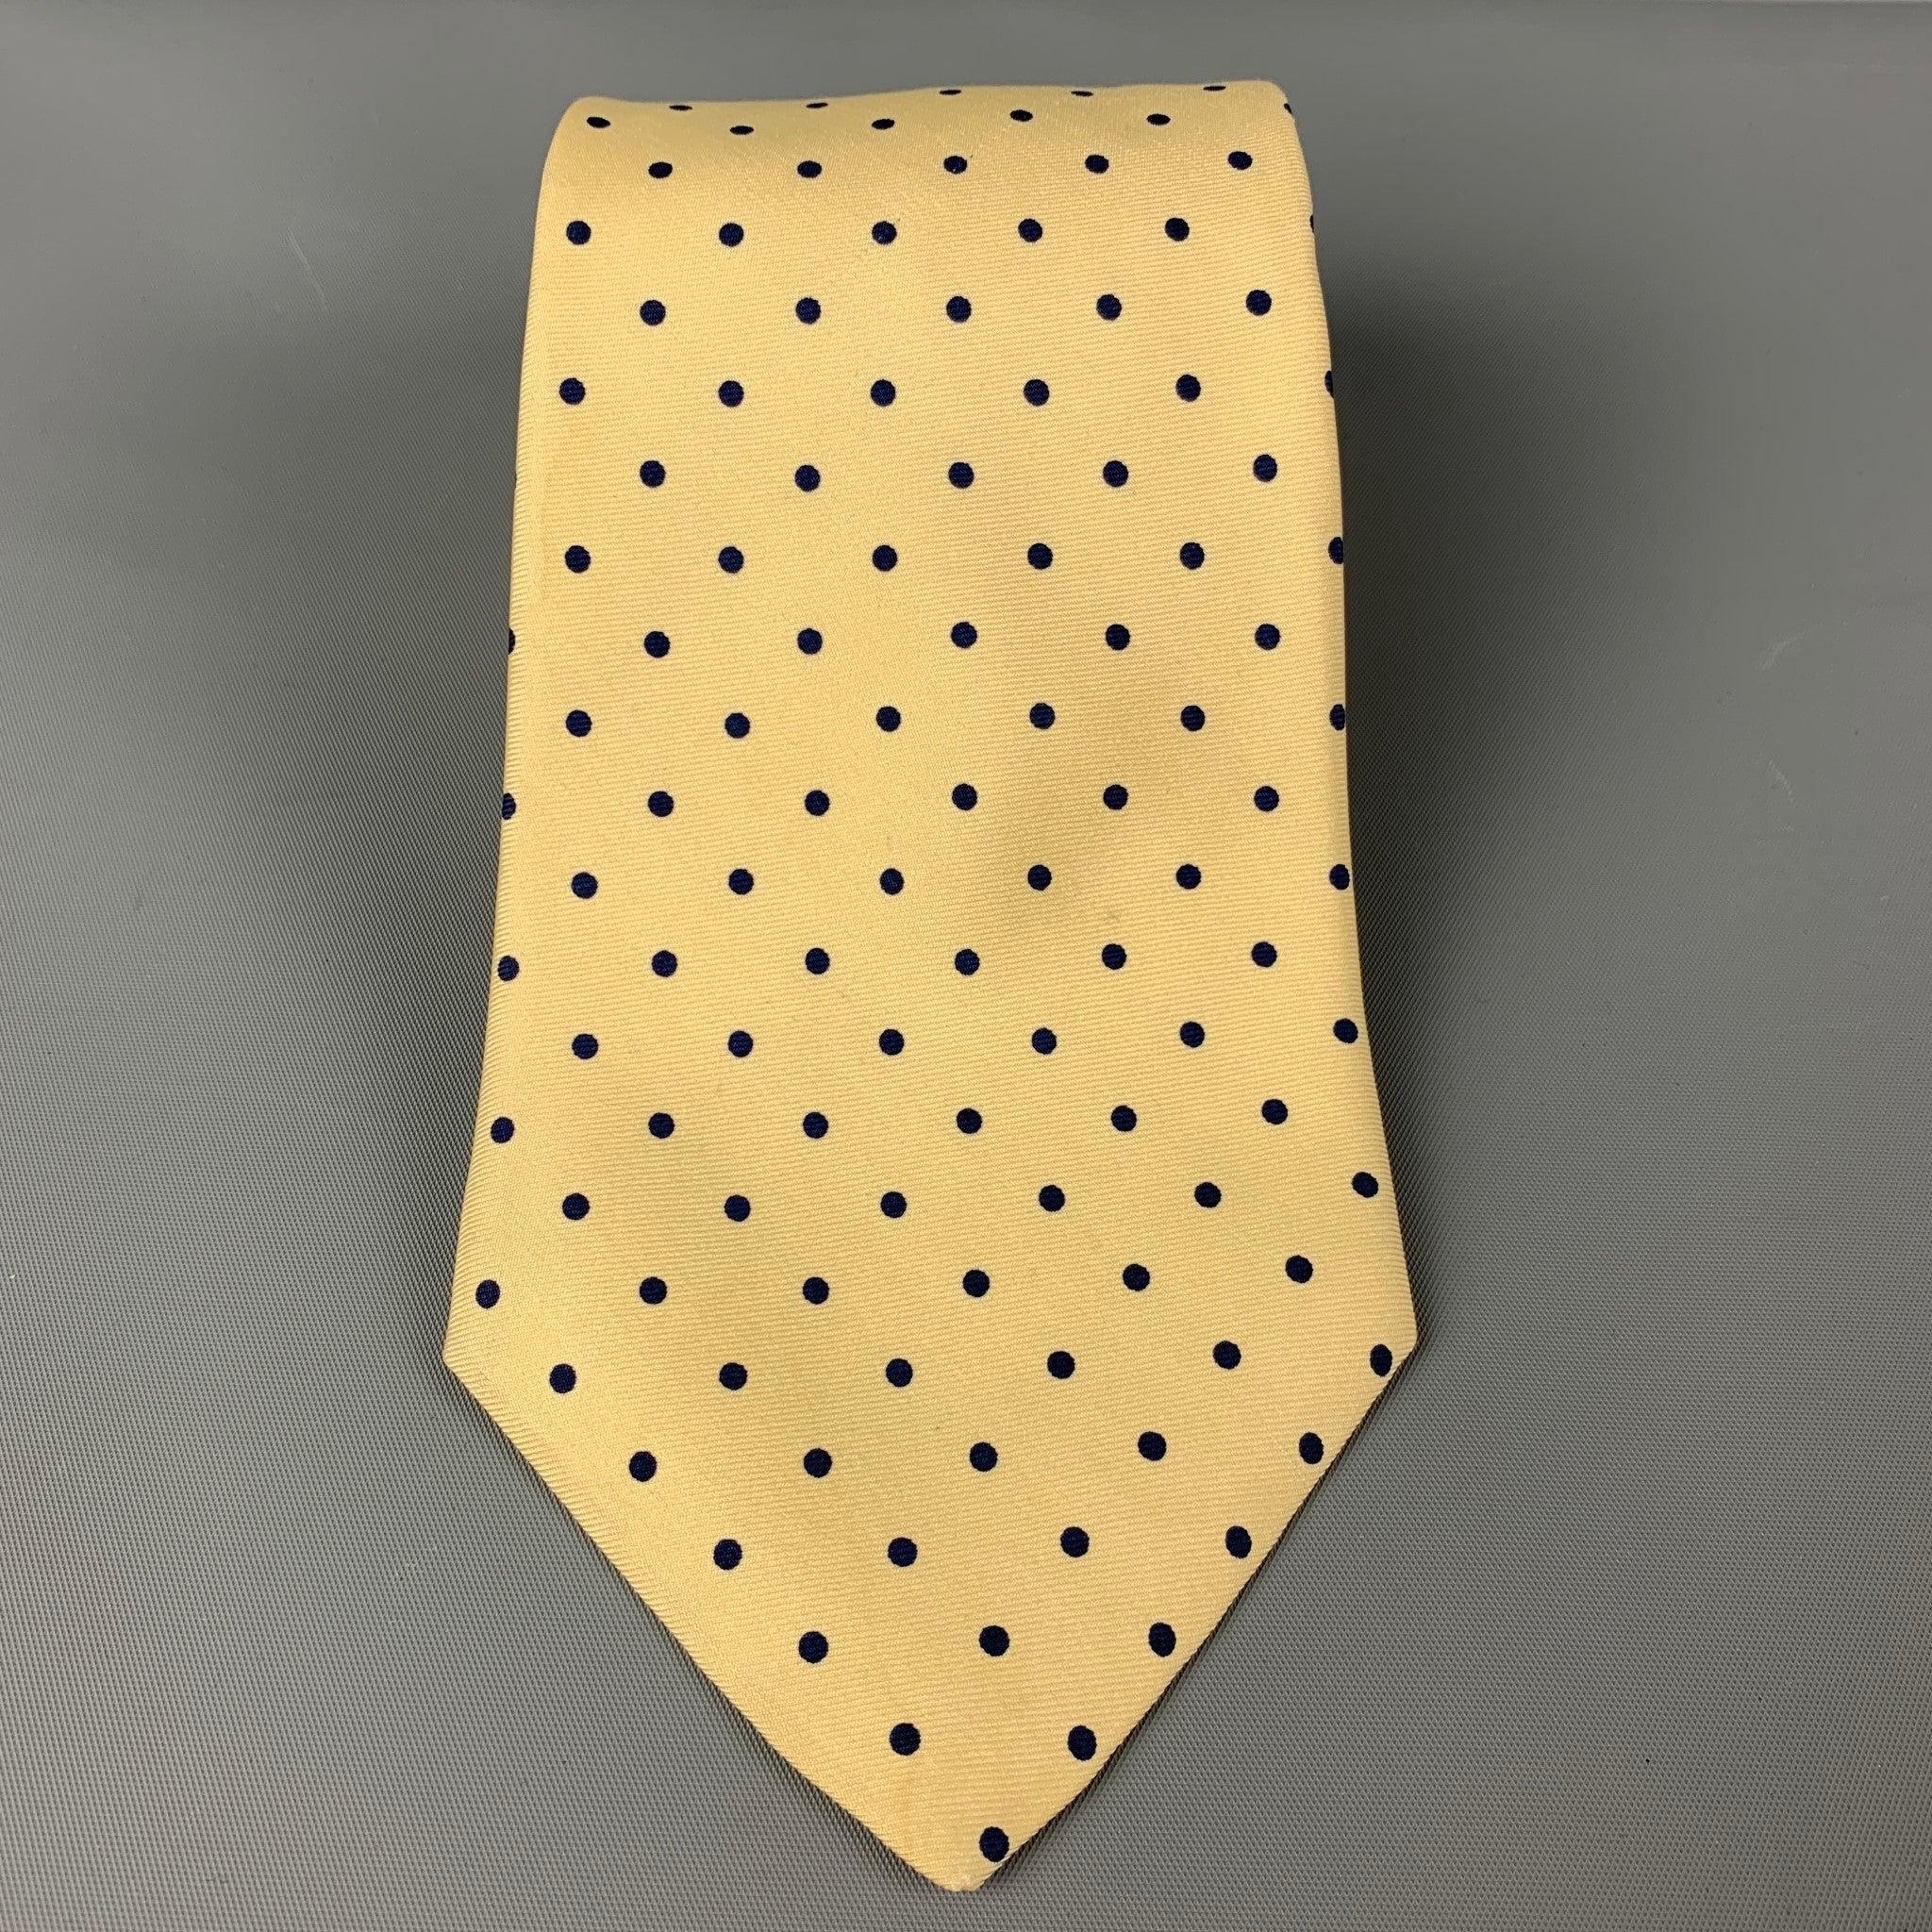 BARNEY'S NEW YORK
 necktie comes in a yellow & navy twill with a all over polka dot print. Good Pre-Owned Condition.Width: 4 inches 
  
  
  
 Sui Generis Reference: 117008
 Category: Tie
 More Details
  
 Brand: BARNEY'S NEW YORK
 Color: Yellow &